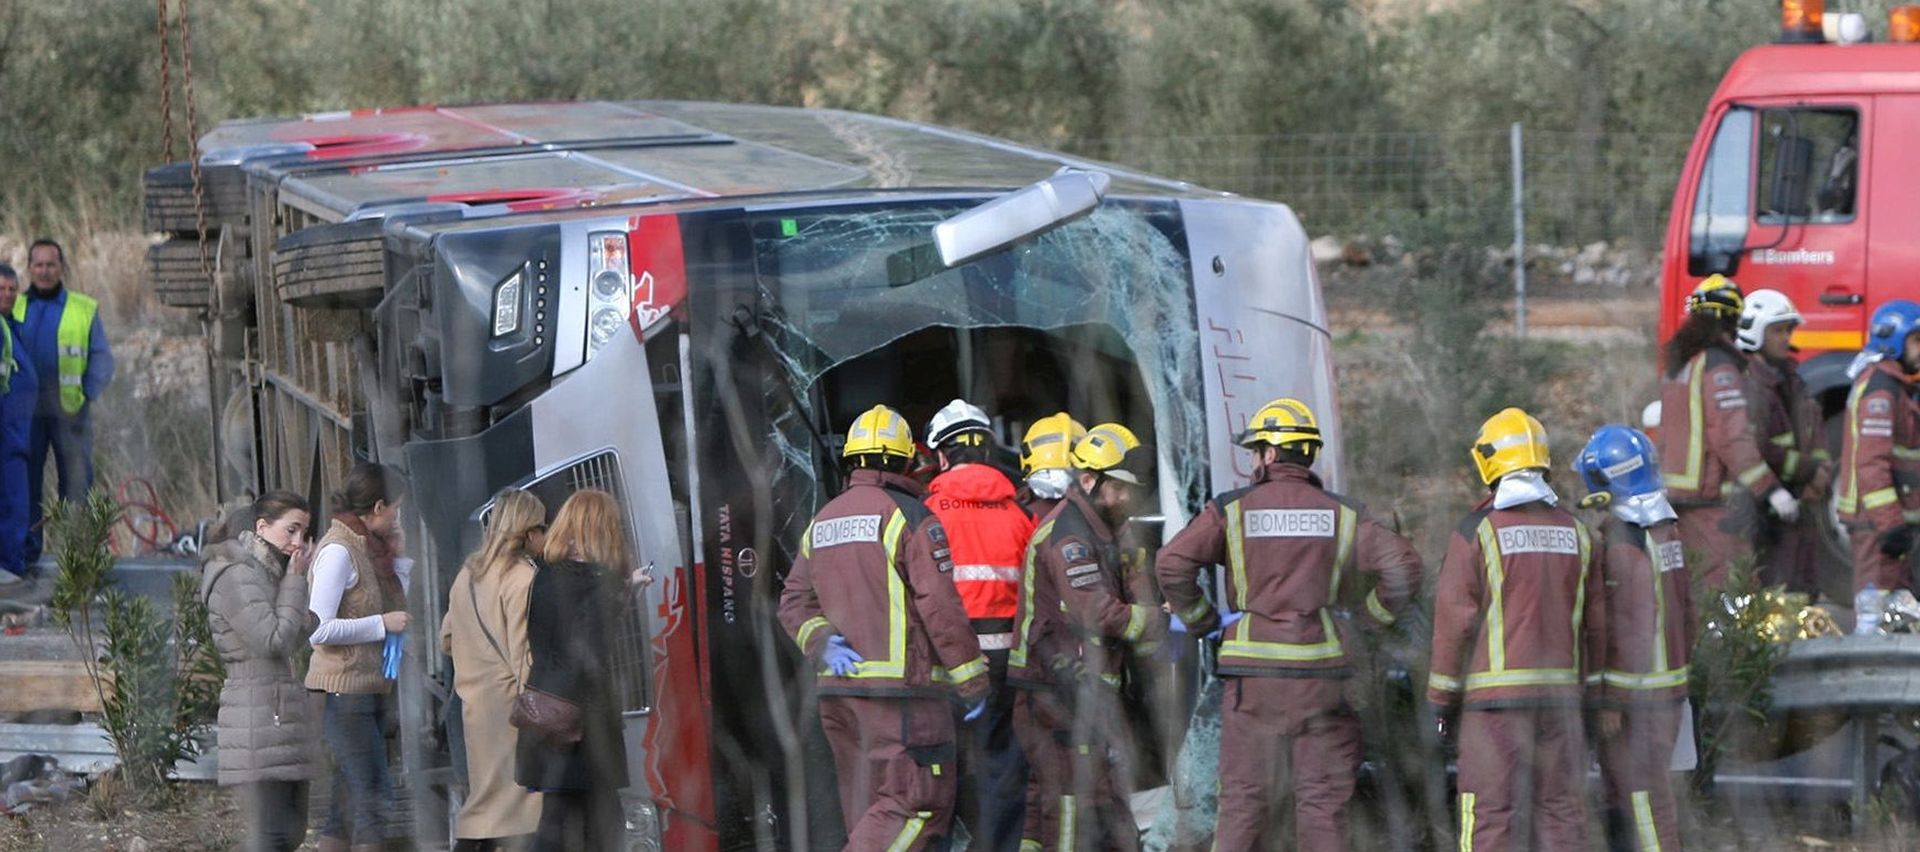 epa05222062 Firemen work at the site of a coach crash that has left at least 14 students dead at the AP-7 motorway in Freginals, in the province of Tarragona, northeastern Spain, 20 March 2016. The coach carrying dozens of Erasmus students collided with a car and overturned. The students from several different countries were heading to Barcelona after attending Las Fallas Festival in Valencia, eastern Spain.  EPA/JAUME SELLART